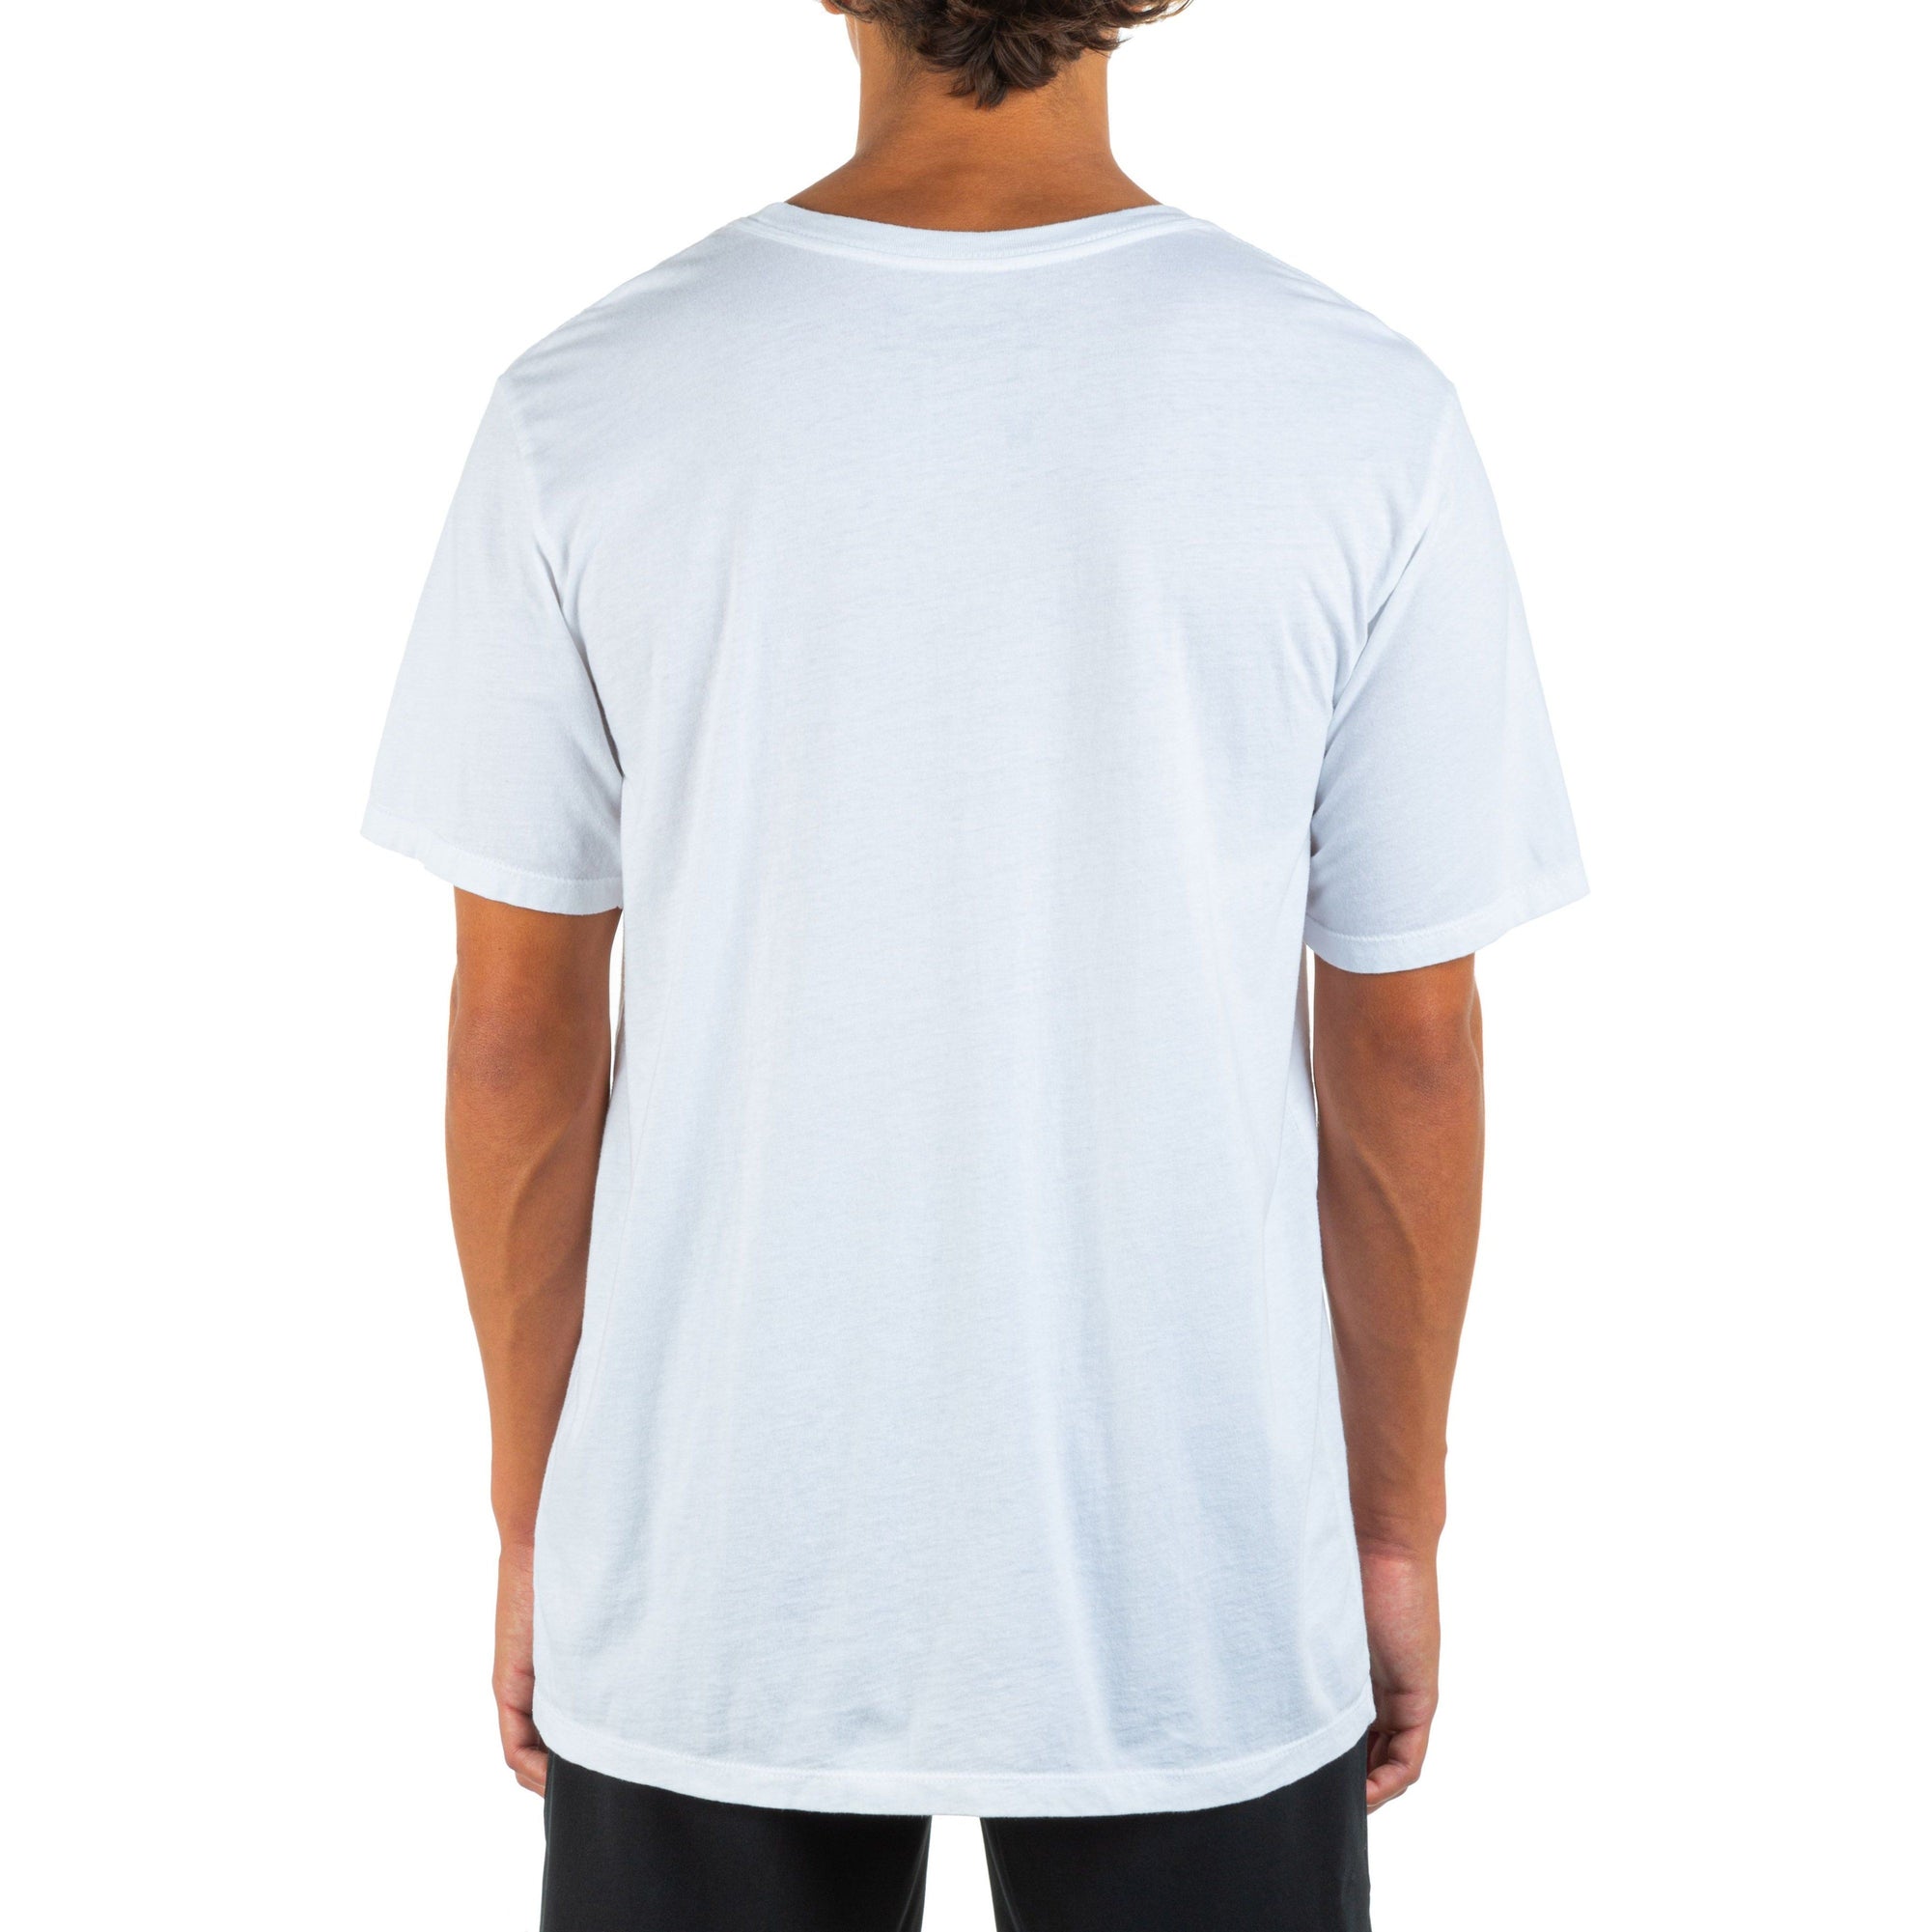 HURLEY Everyday Washed One And Only Solid T-Shirt White MENS APPAREL - Men's Short Sleeve T-Shirts Hurley S 